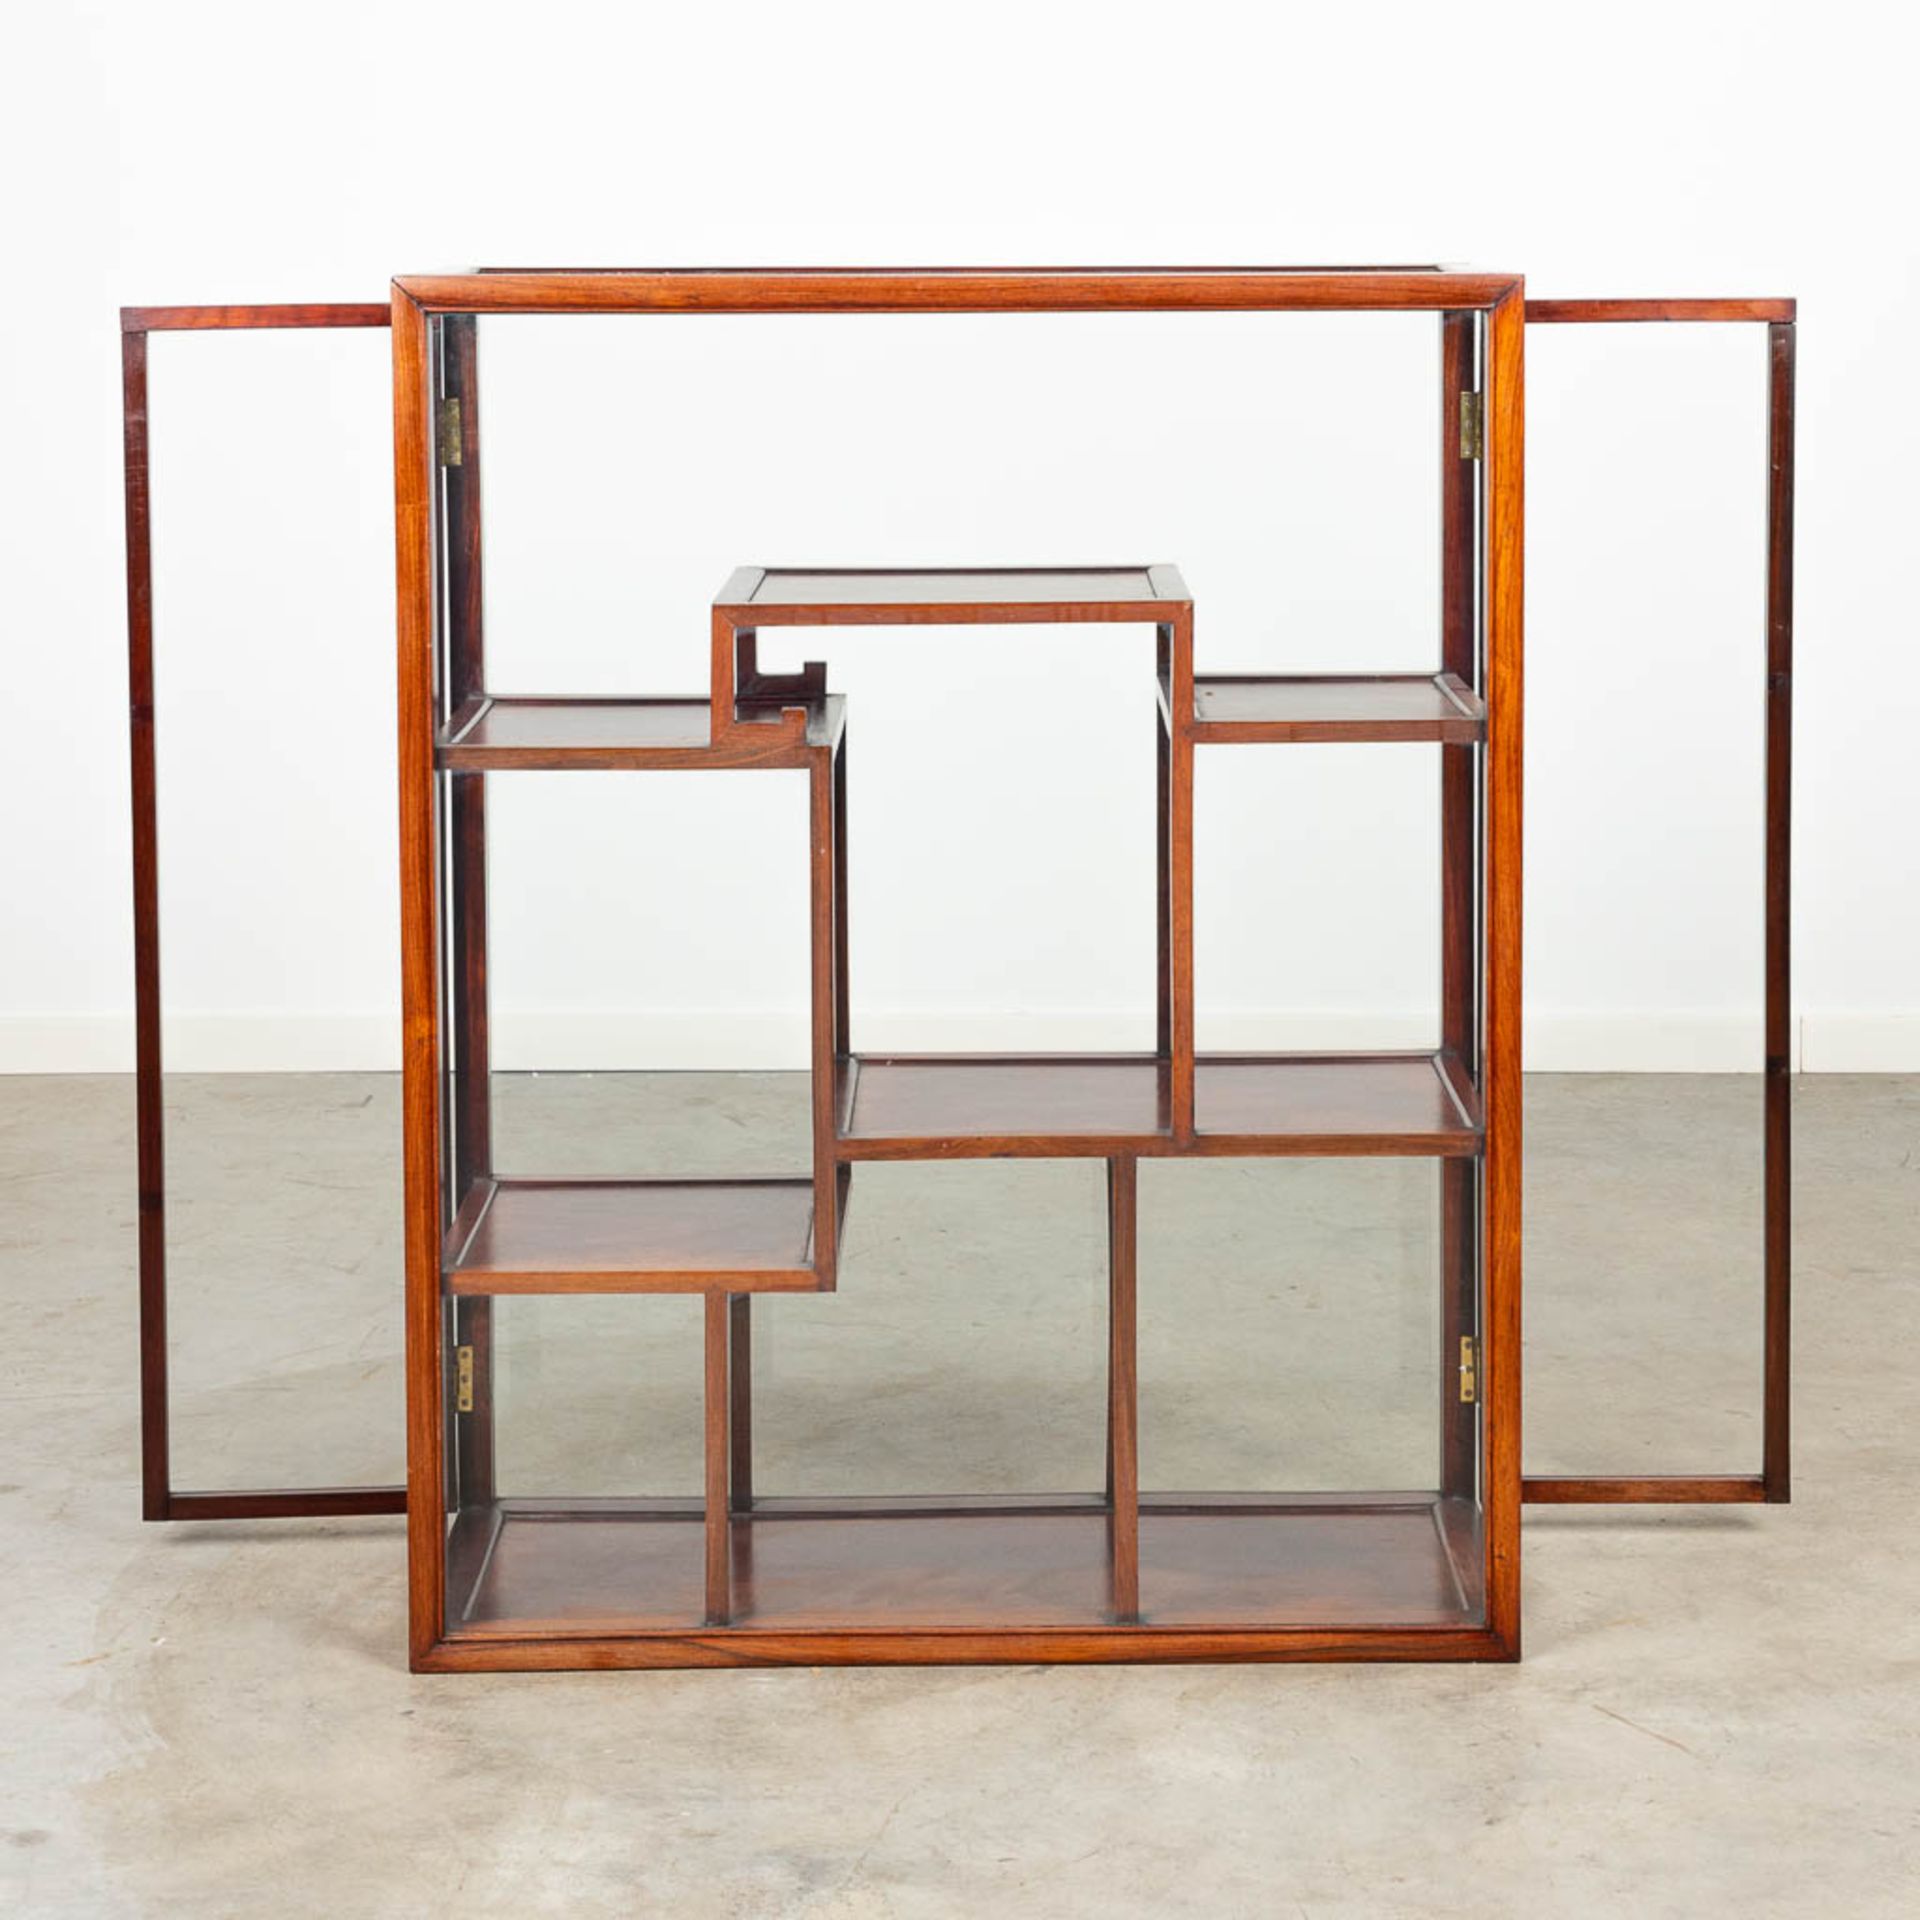 An Oriental display cabinet made of hardwood and glass. - Image 5 of 5